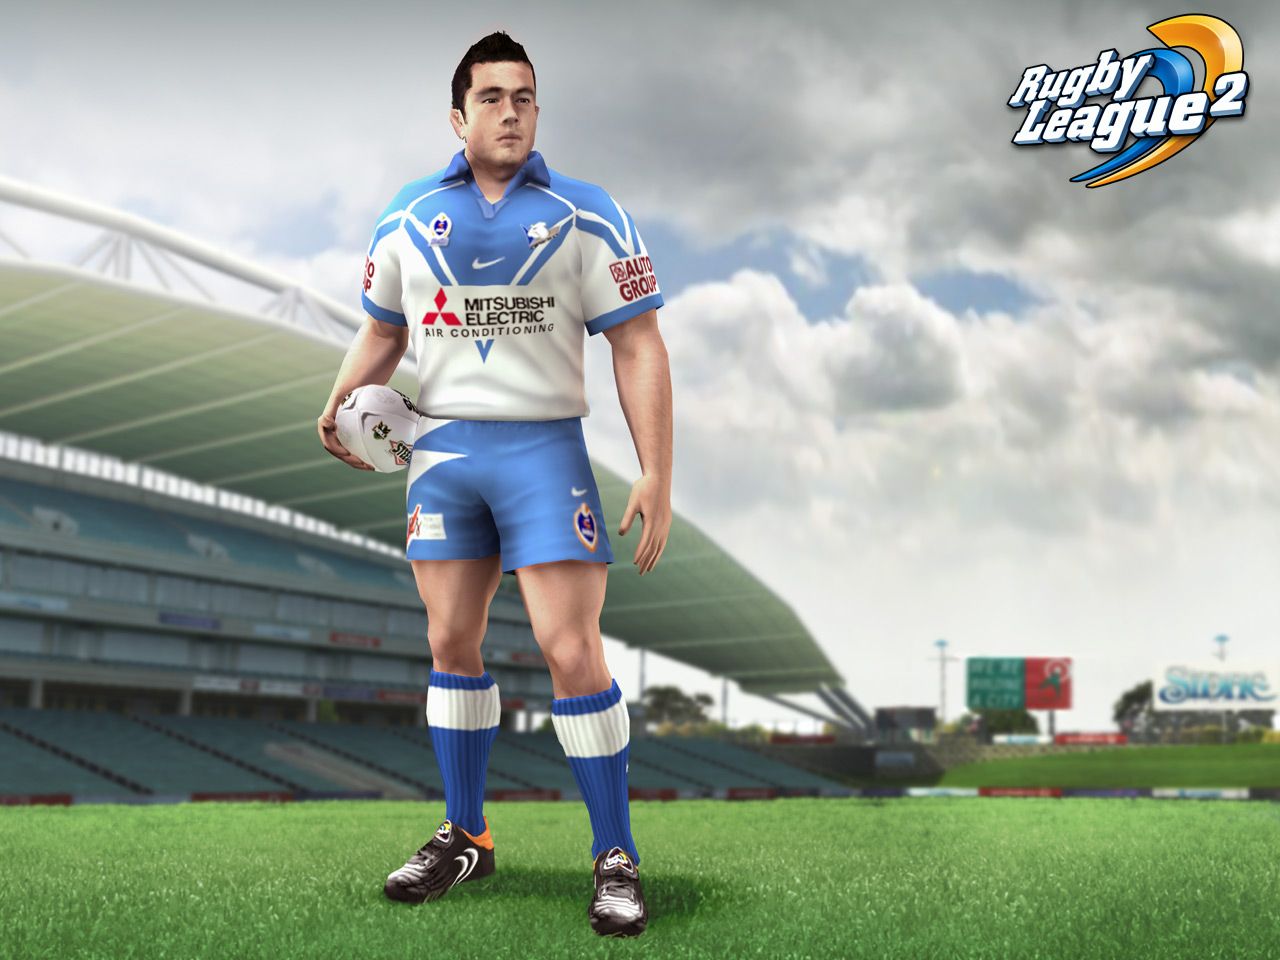 Official Rugby League 2� Website